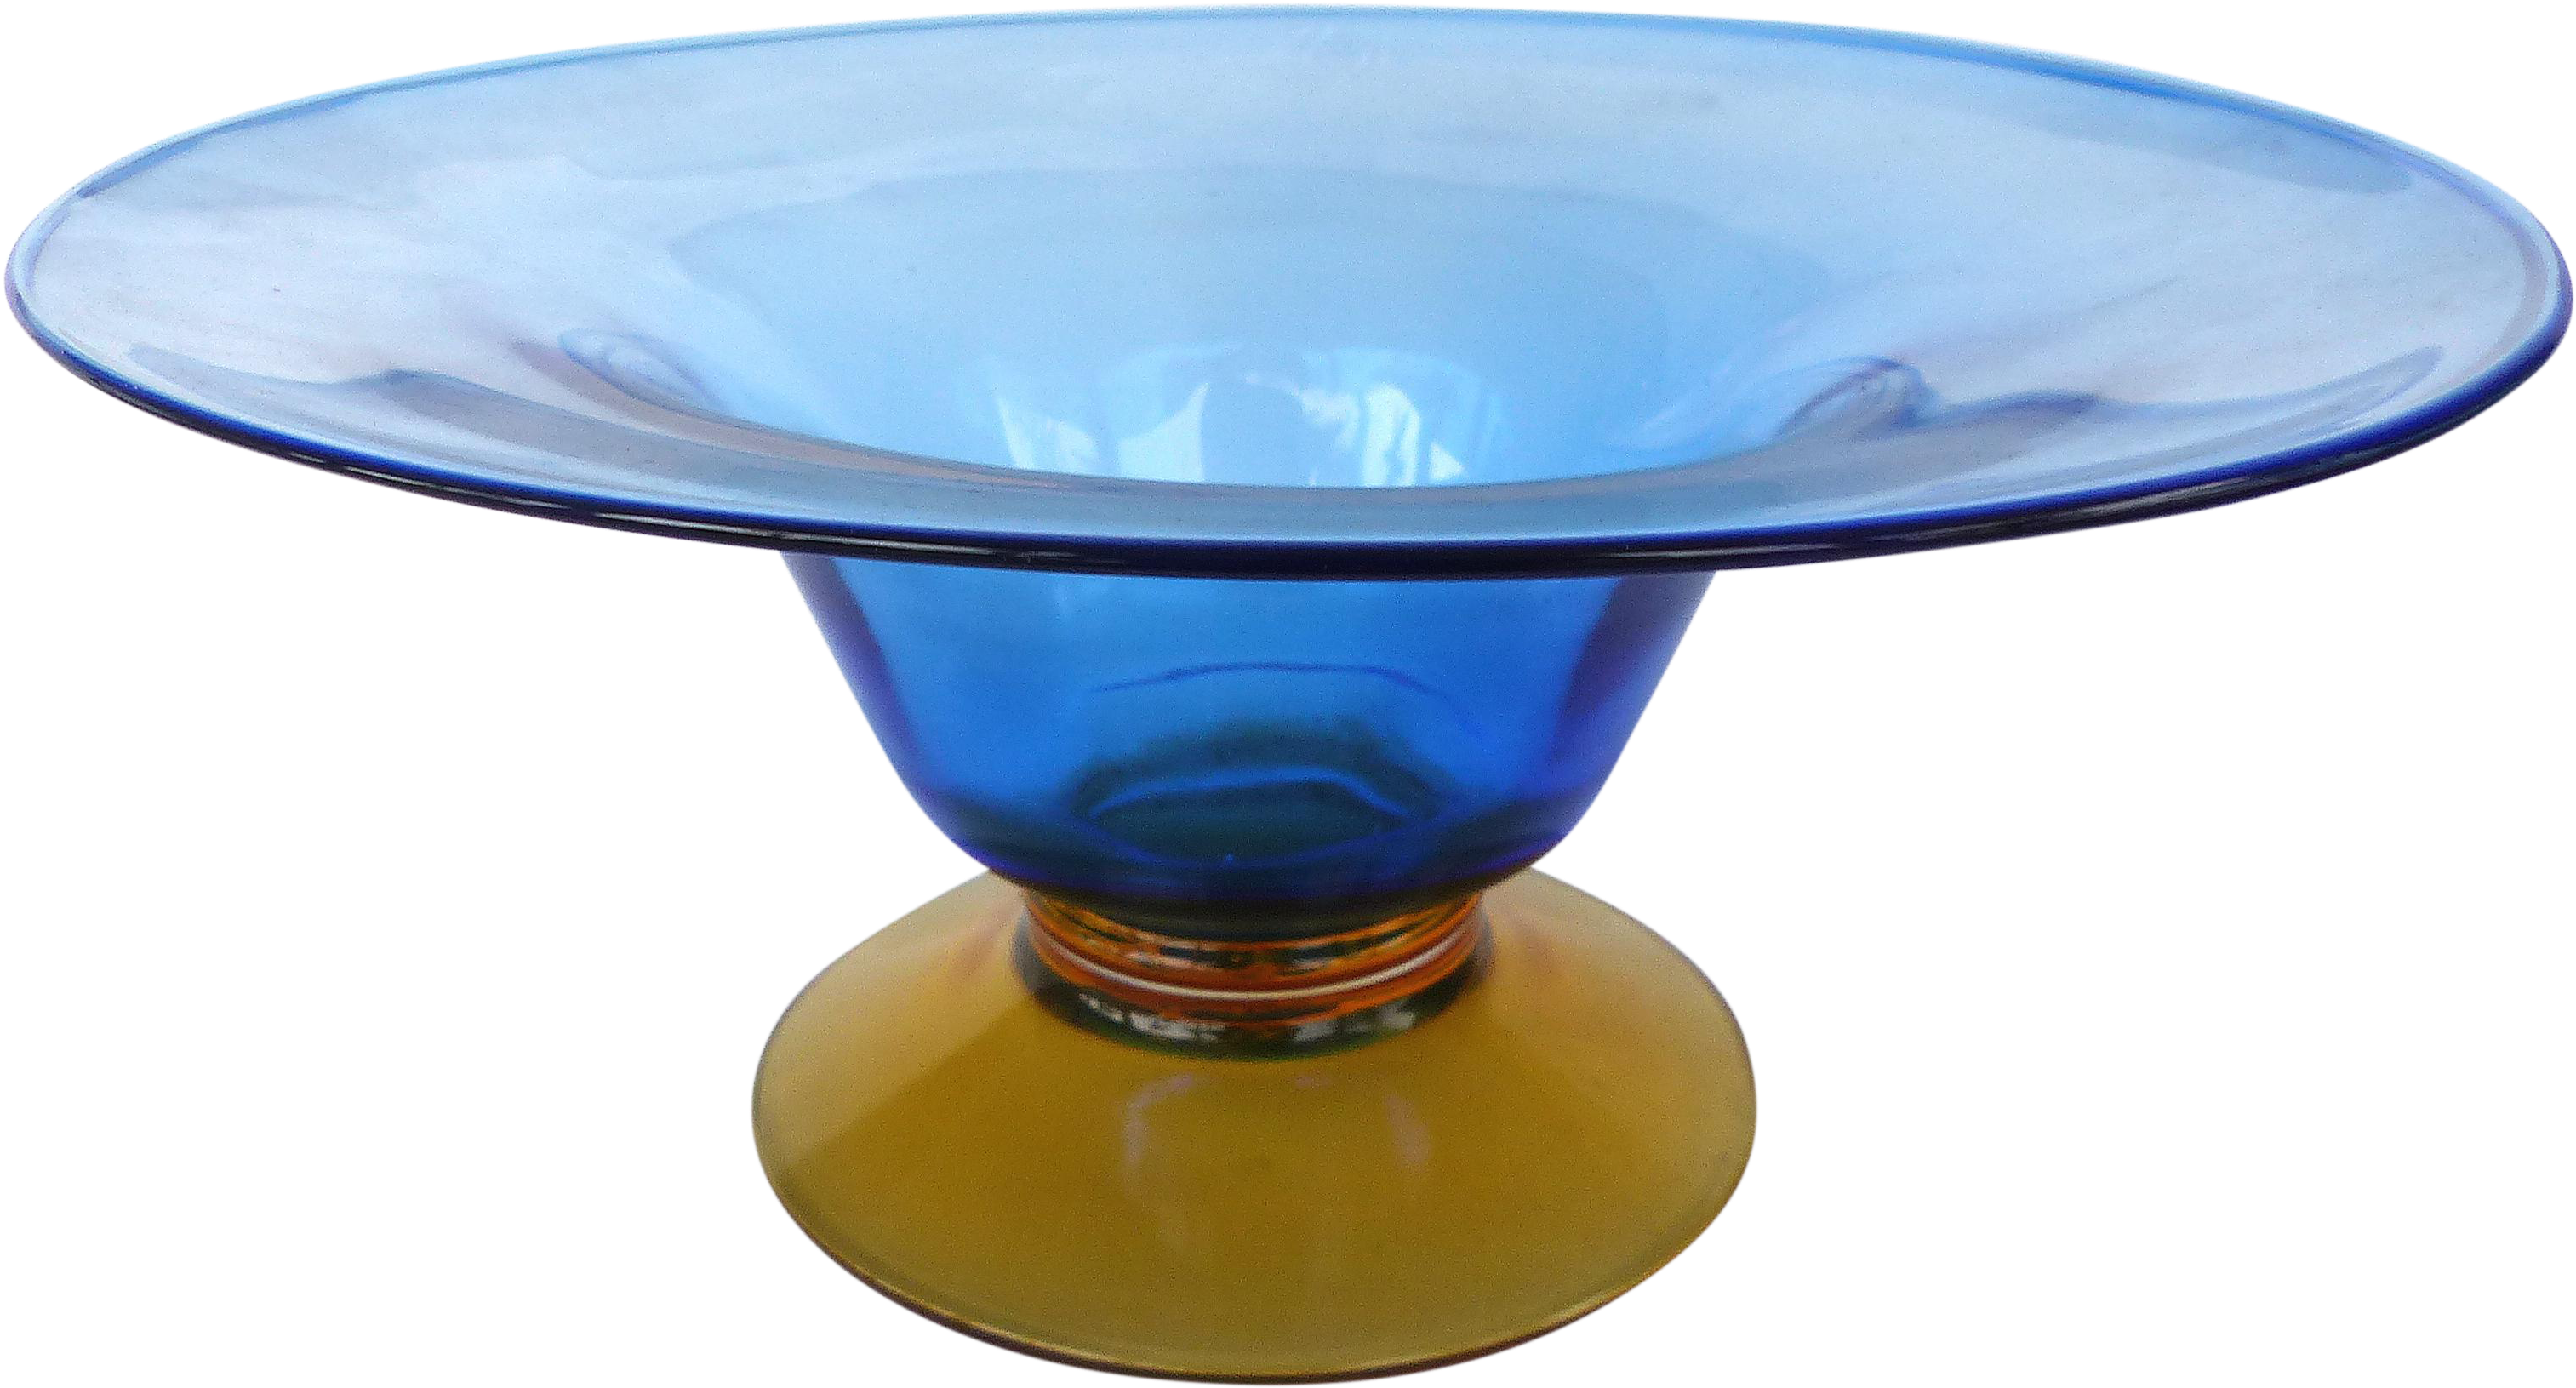 Footed Blown Murano Glass Bowl - Footed Blown Murano Glass Bowl (3362x1811)